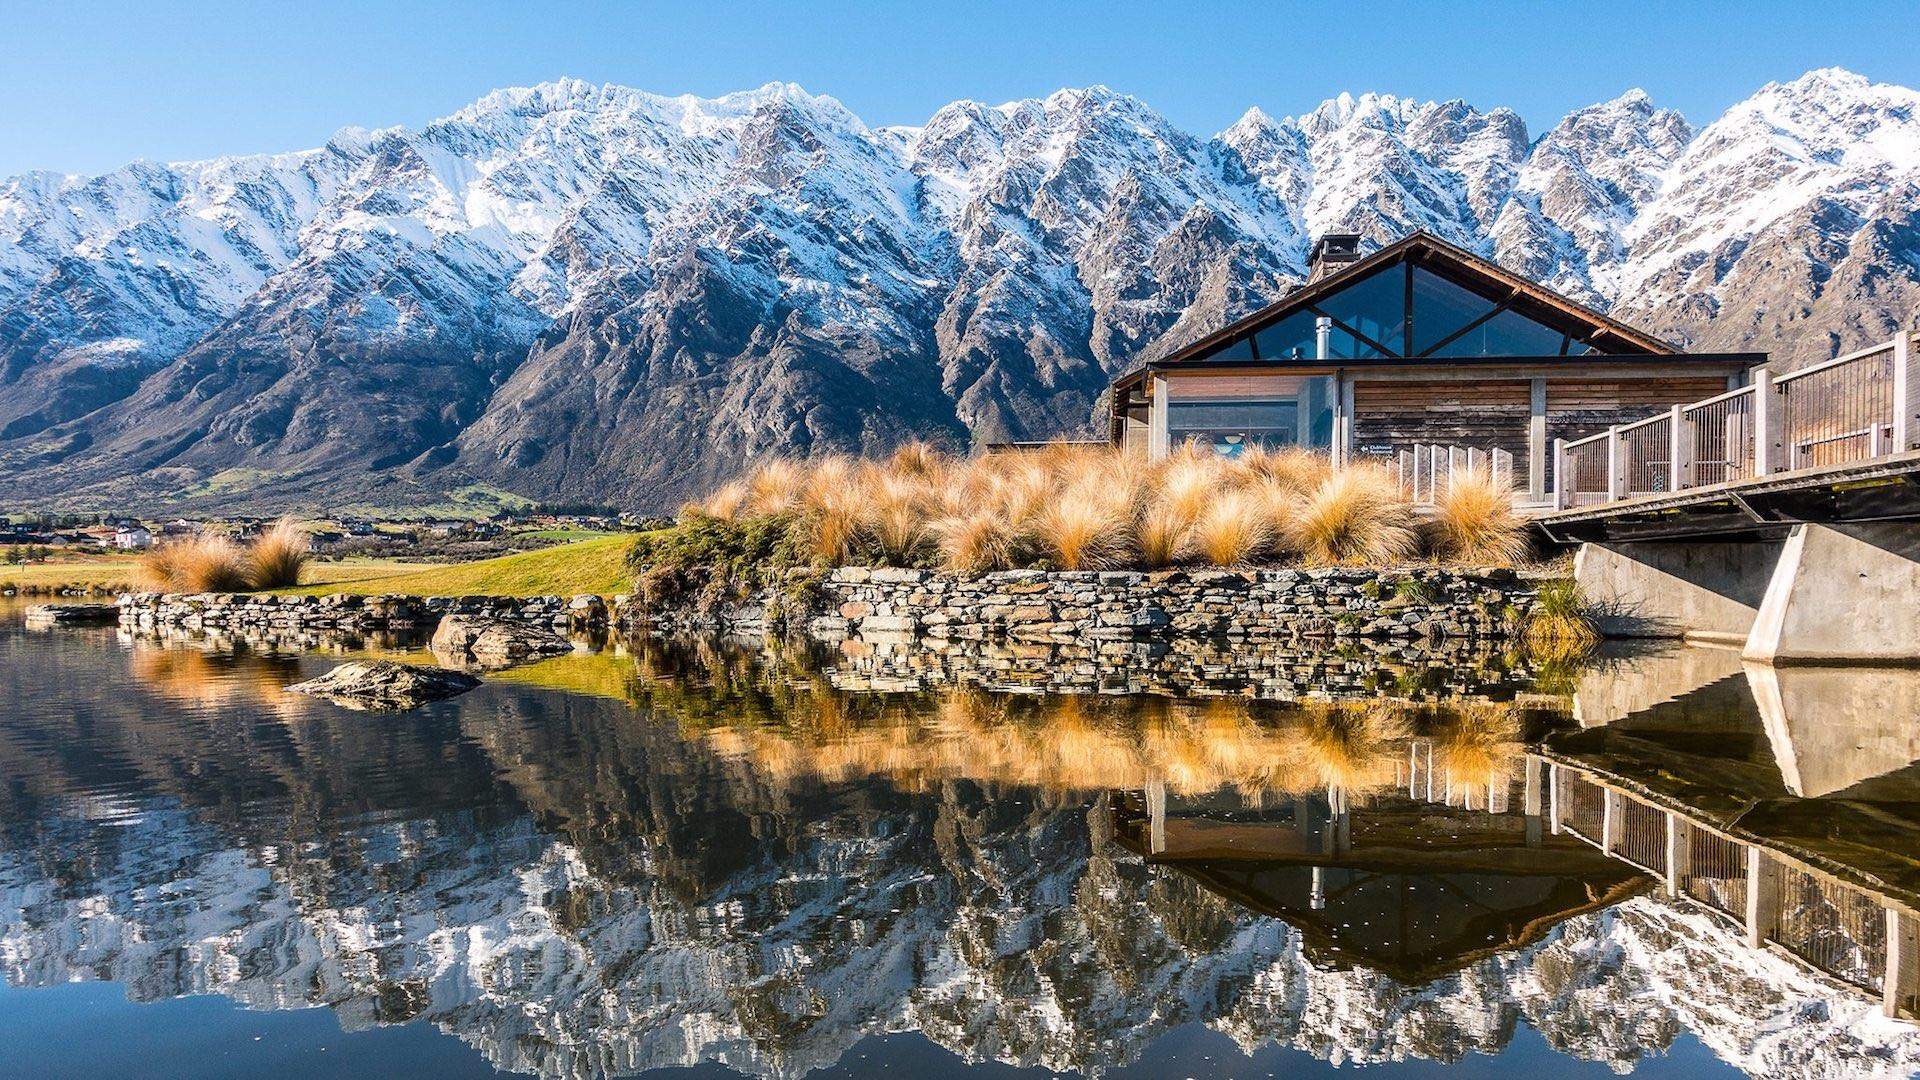 This Stunning Queenstown Restaurant Has Been Refreshed Just in Time for Summer